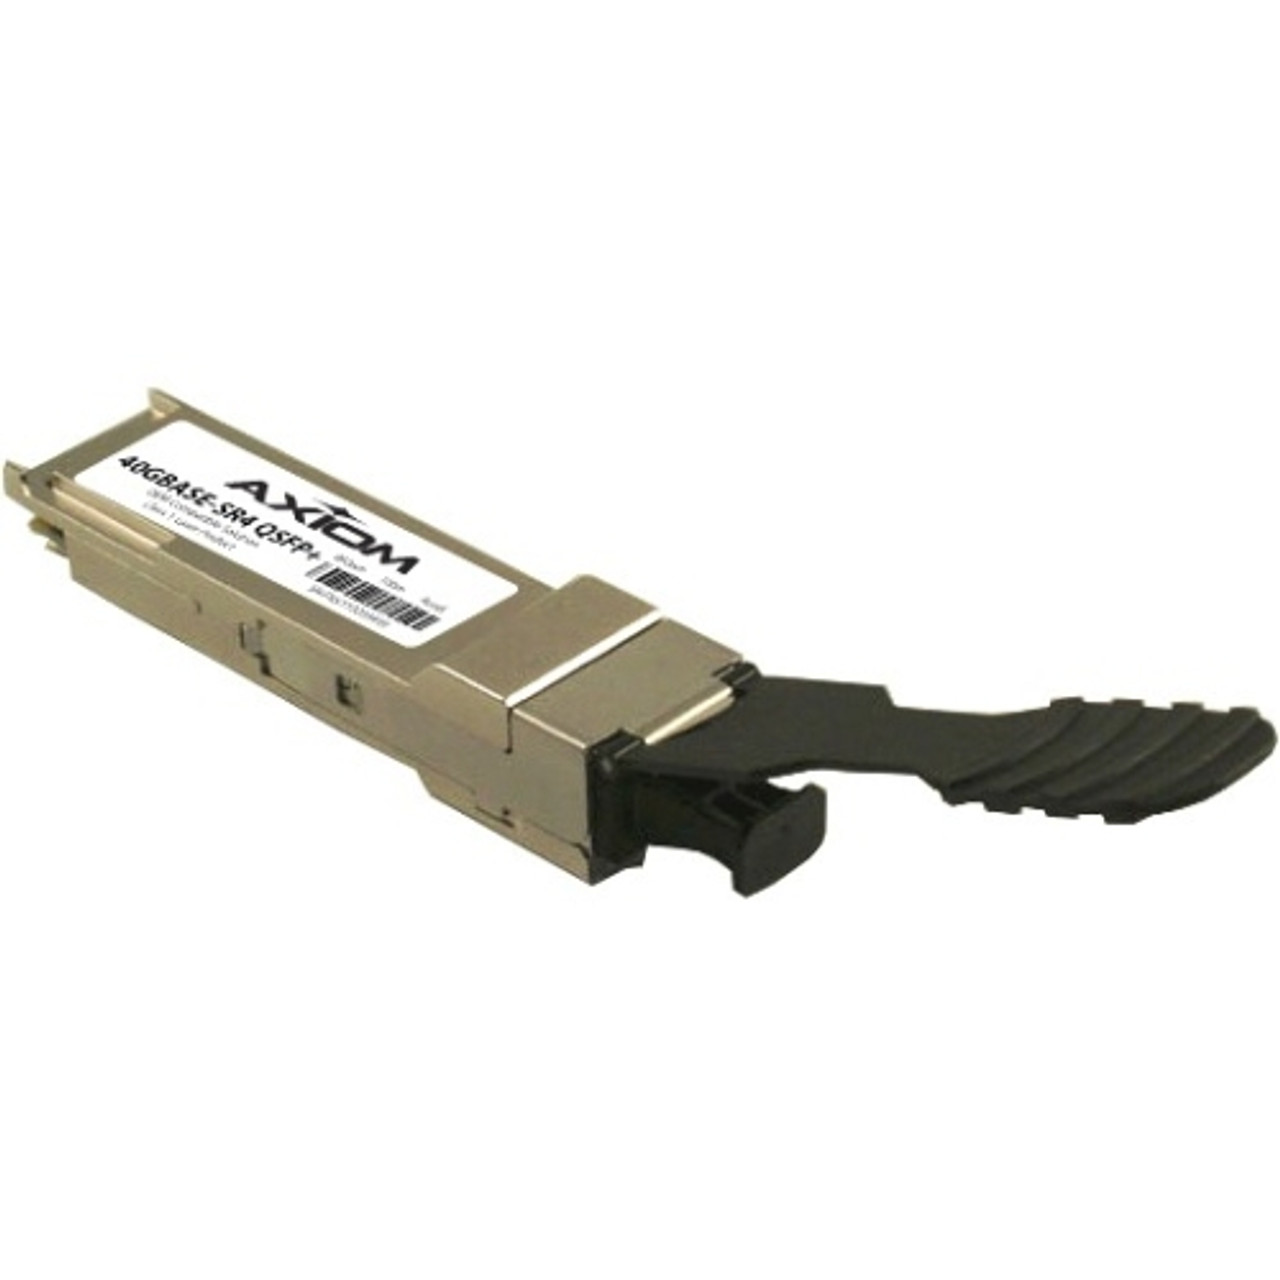 10320-AX Axiom 40Gbps 40GBase-LR4 Single-mode Fiber 10km 1310nm Duplex LC Connector QSFP+ Transceiver Module for Extreme Compatible